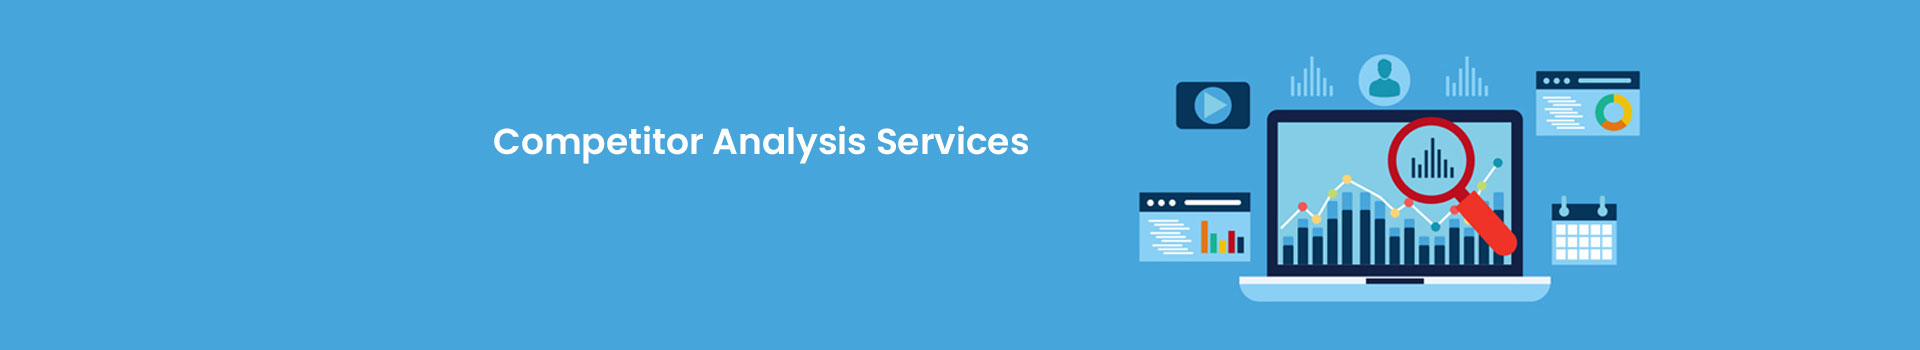 Competitor-analysis-services